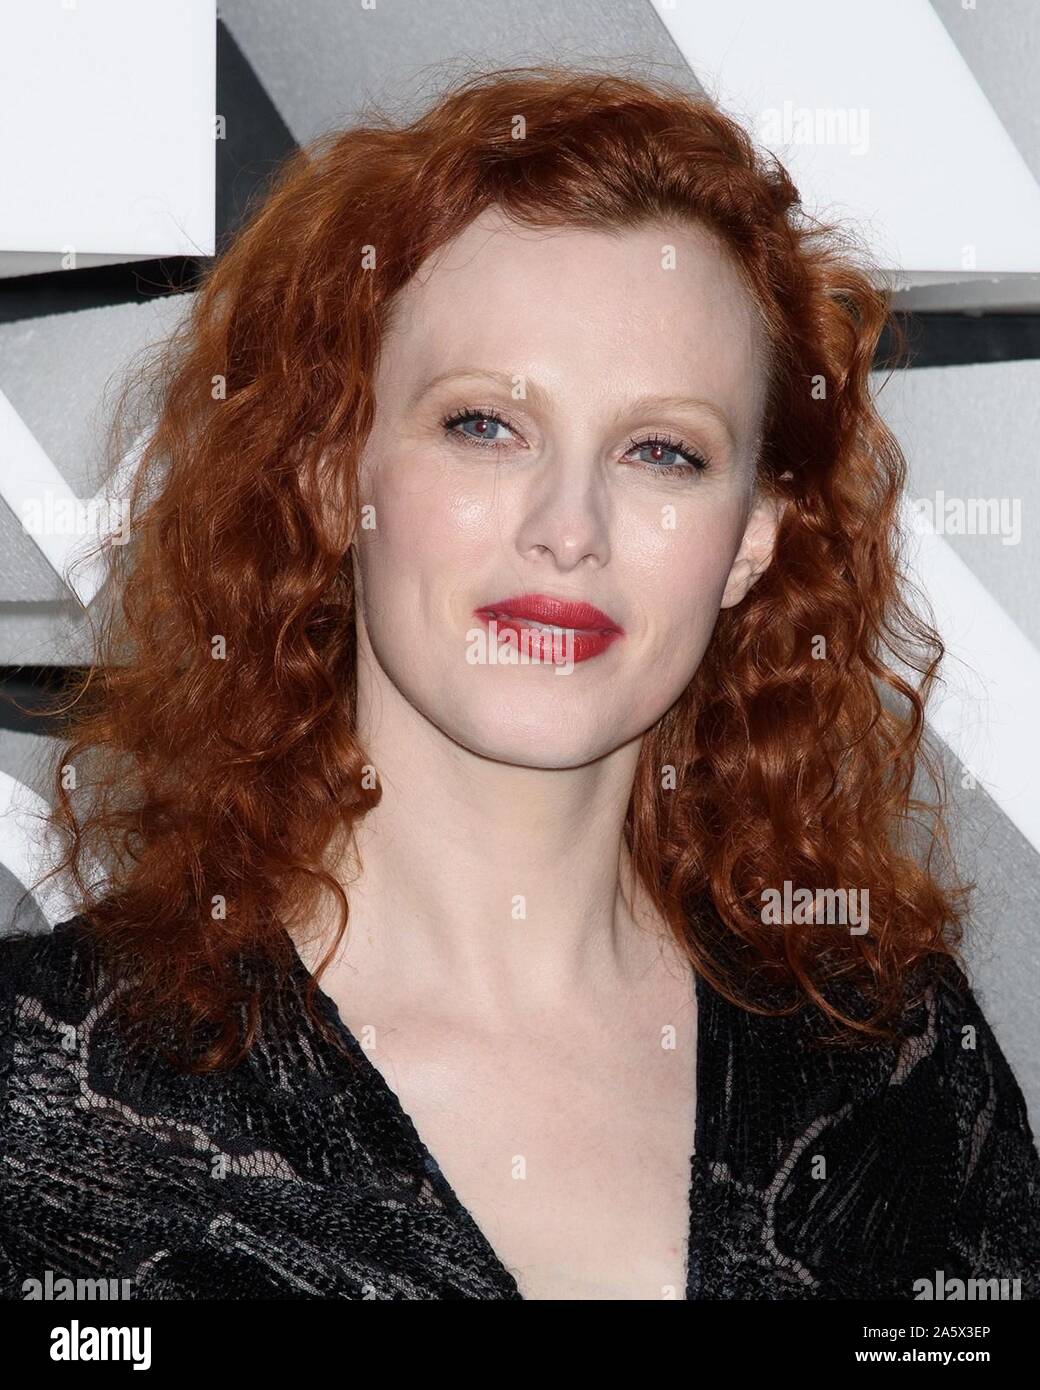 New York, NY, USA. 22nd Oct, 2019. Karen Elson at arrivals for Nordstrom NYC Flagship Opening Party, 225 West 57th Street, New York, NY October 22, 2019. Credit: RCF/Everett Collection/Alamy Live News Stock Photo